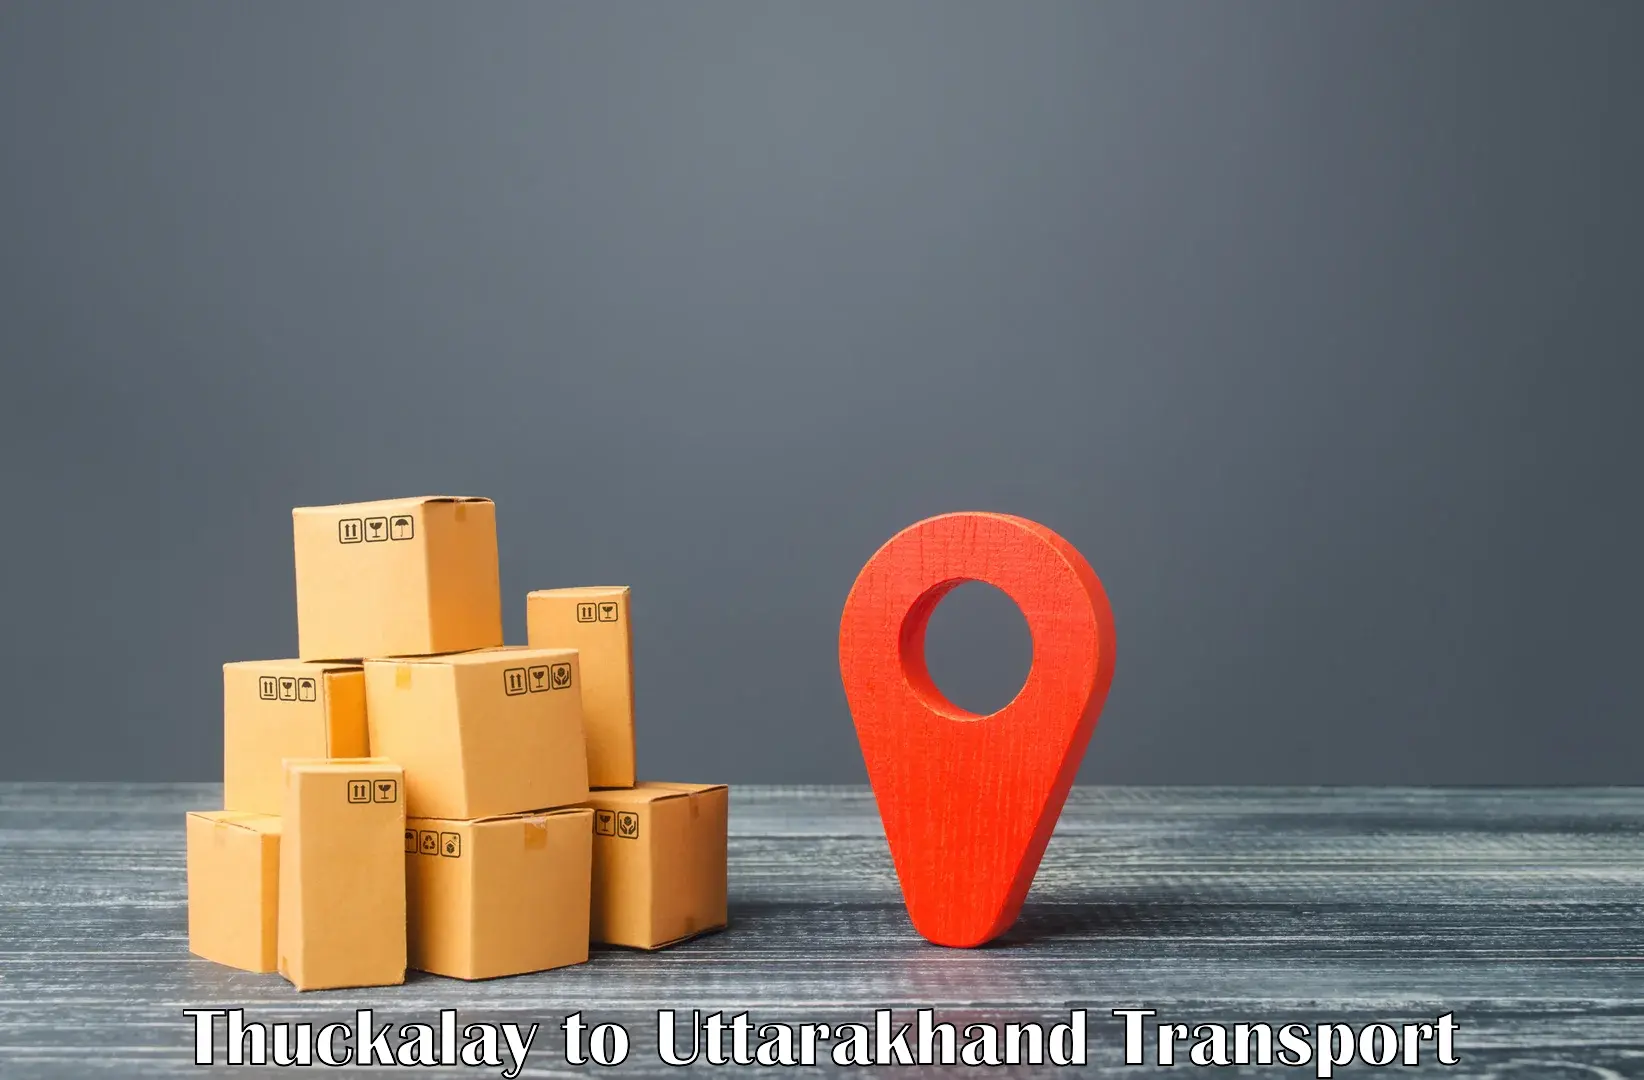 Domestic goods transportation services Thuckalay to IIT Roorkee